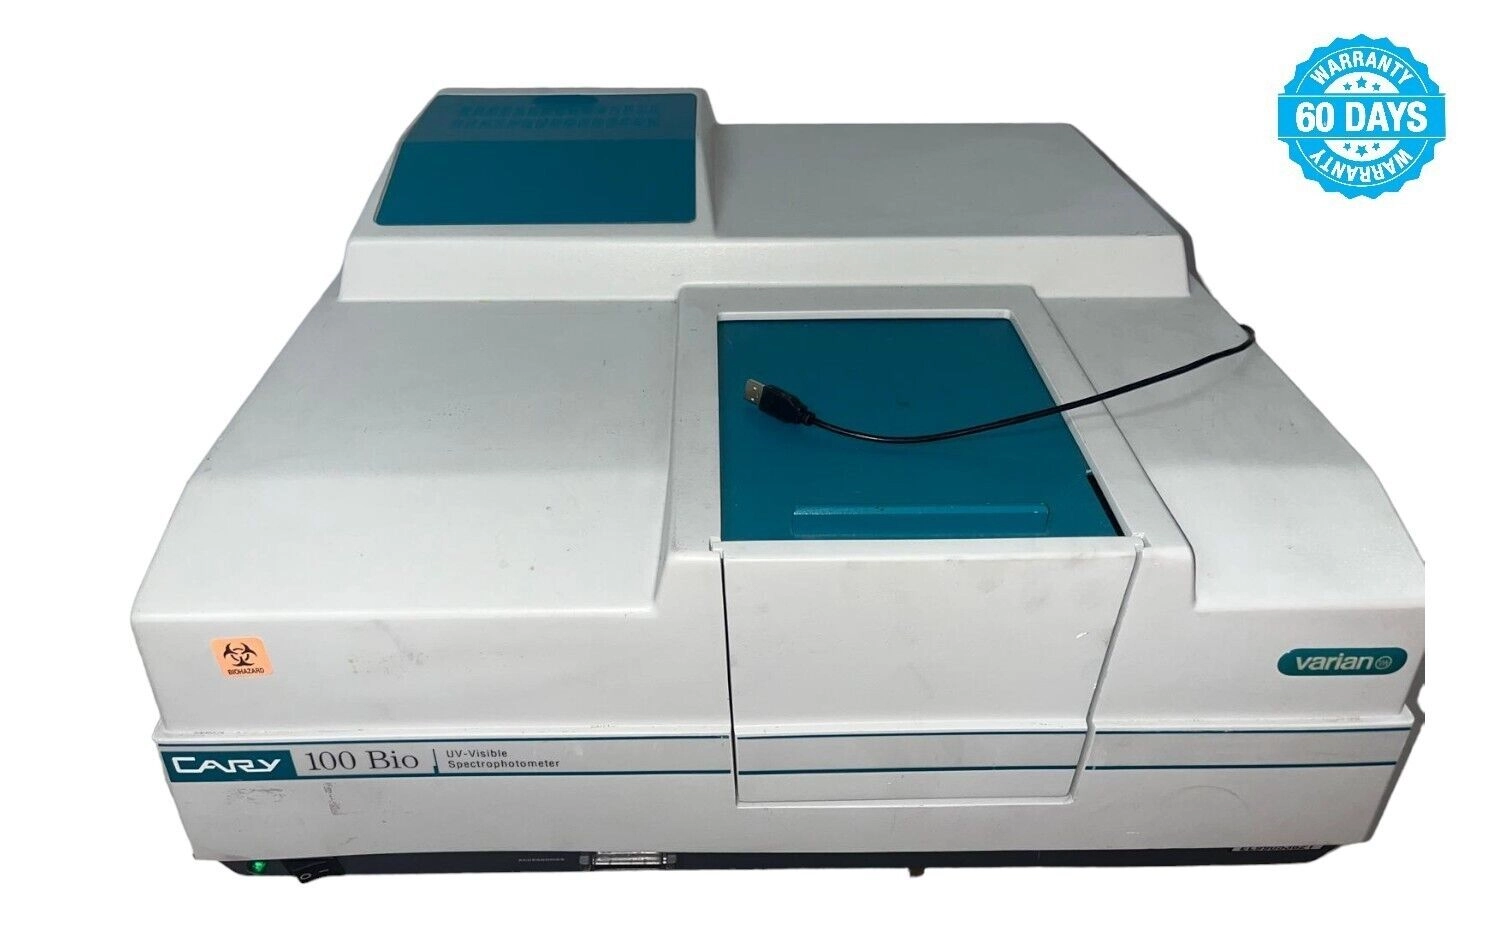 Agilent Varian Cary 100 Bio UV Visible Spectrophotometer 